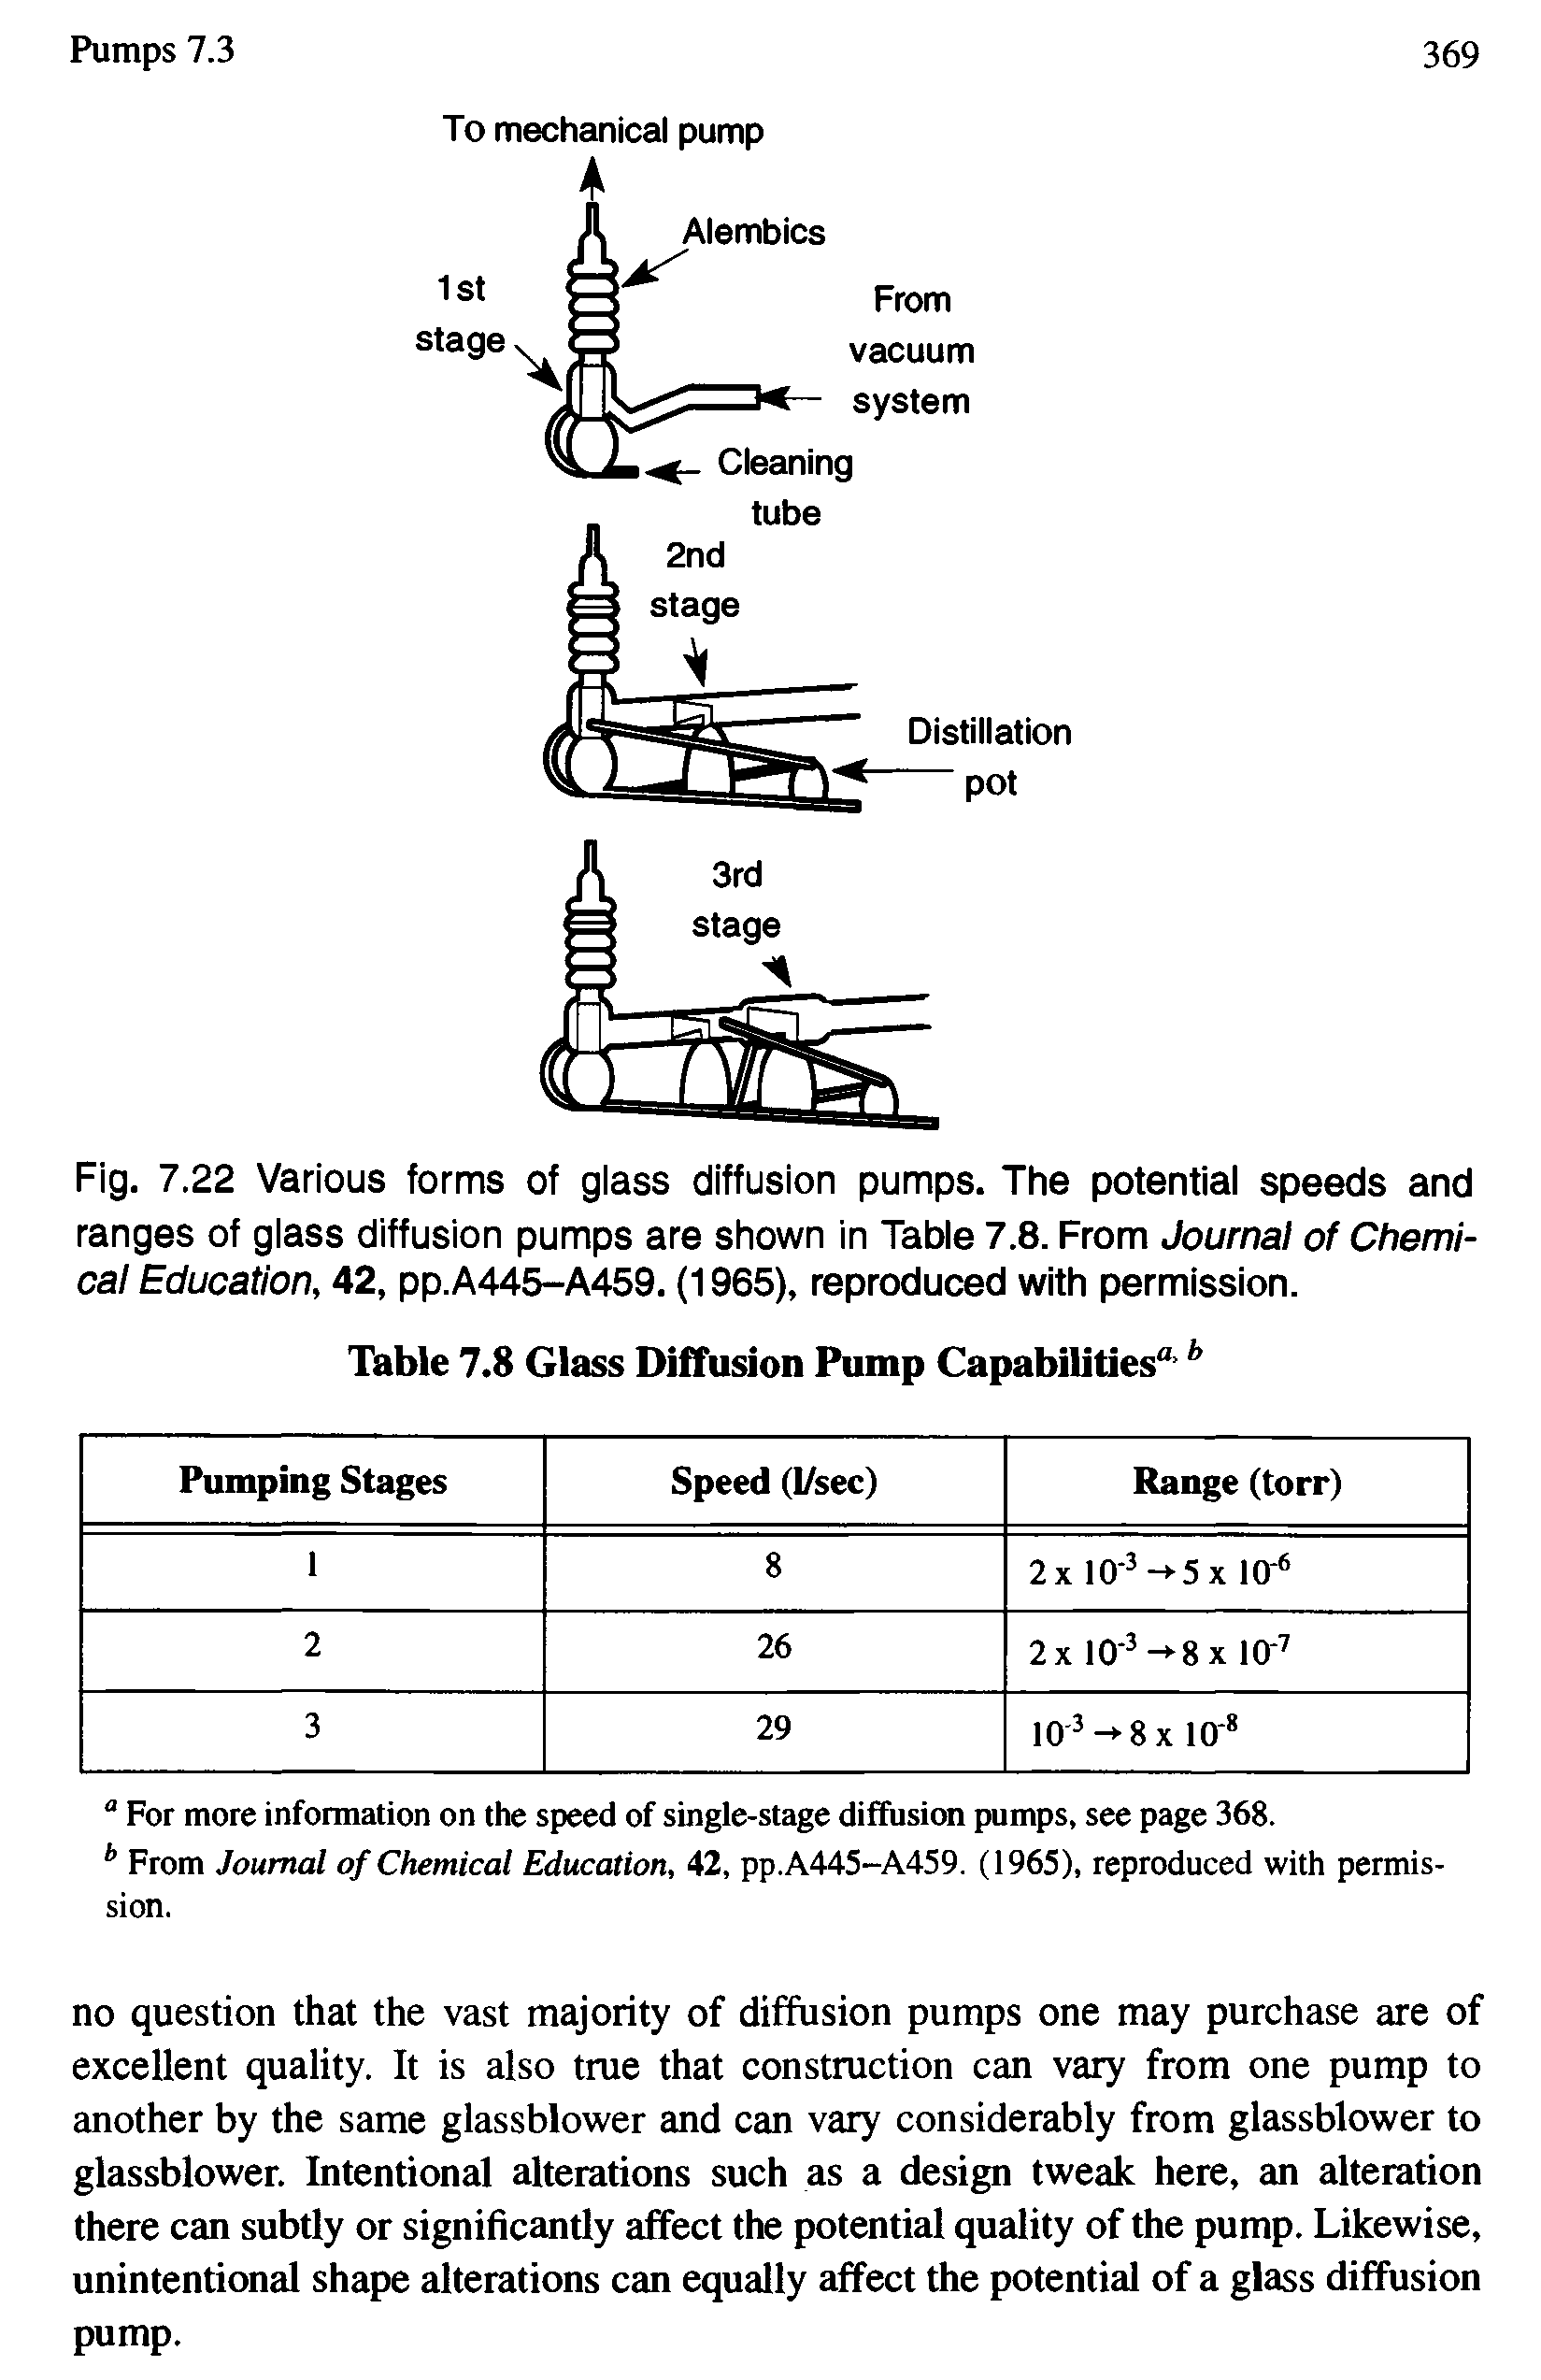 Fig. 7.22 Various forms of glass diffusion pumps. The potential speeds and ranges of glass diffusion pumps are shown in Table 7.8. From Journal of Chemical Education, 42, pp.A445-A459. (1965), reproduced with permission.